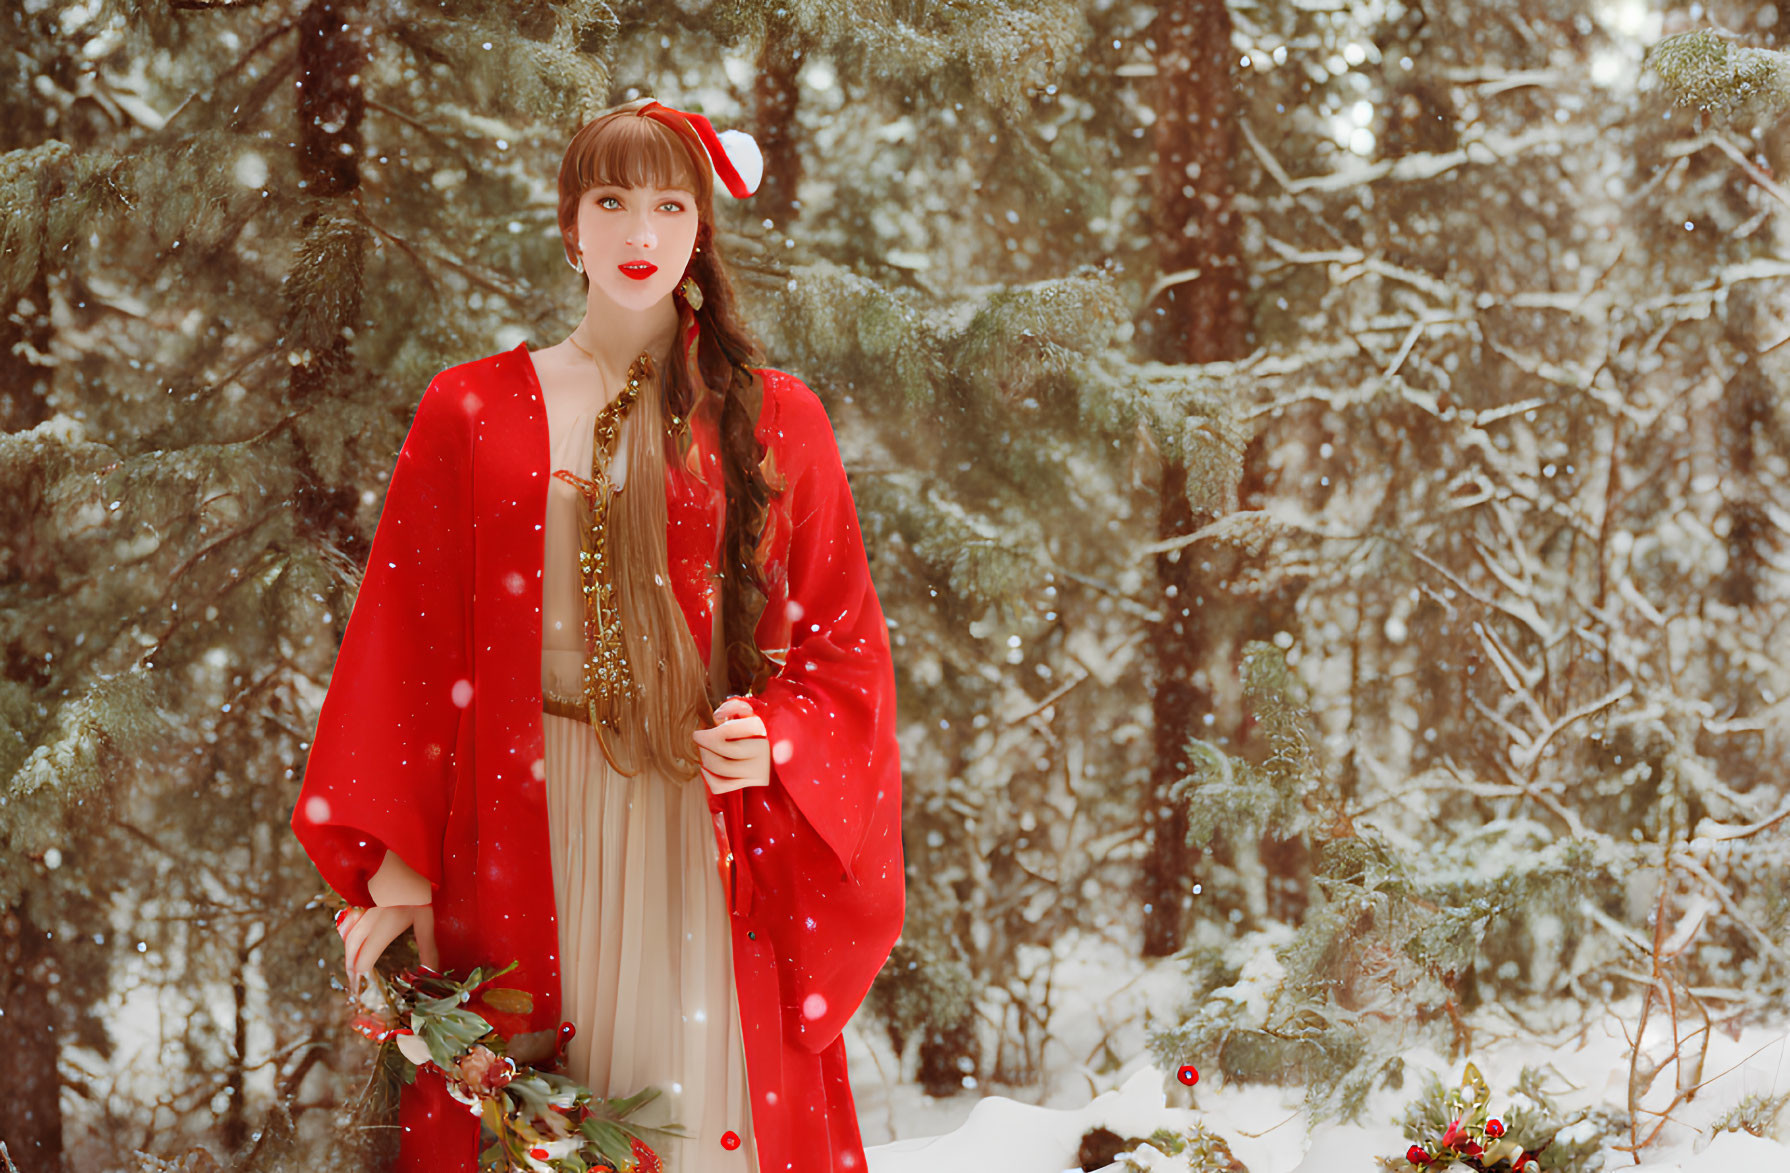 Woman in red cloak and dress with wreath in snowy pine forest